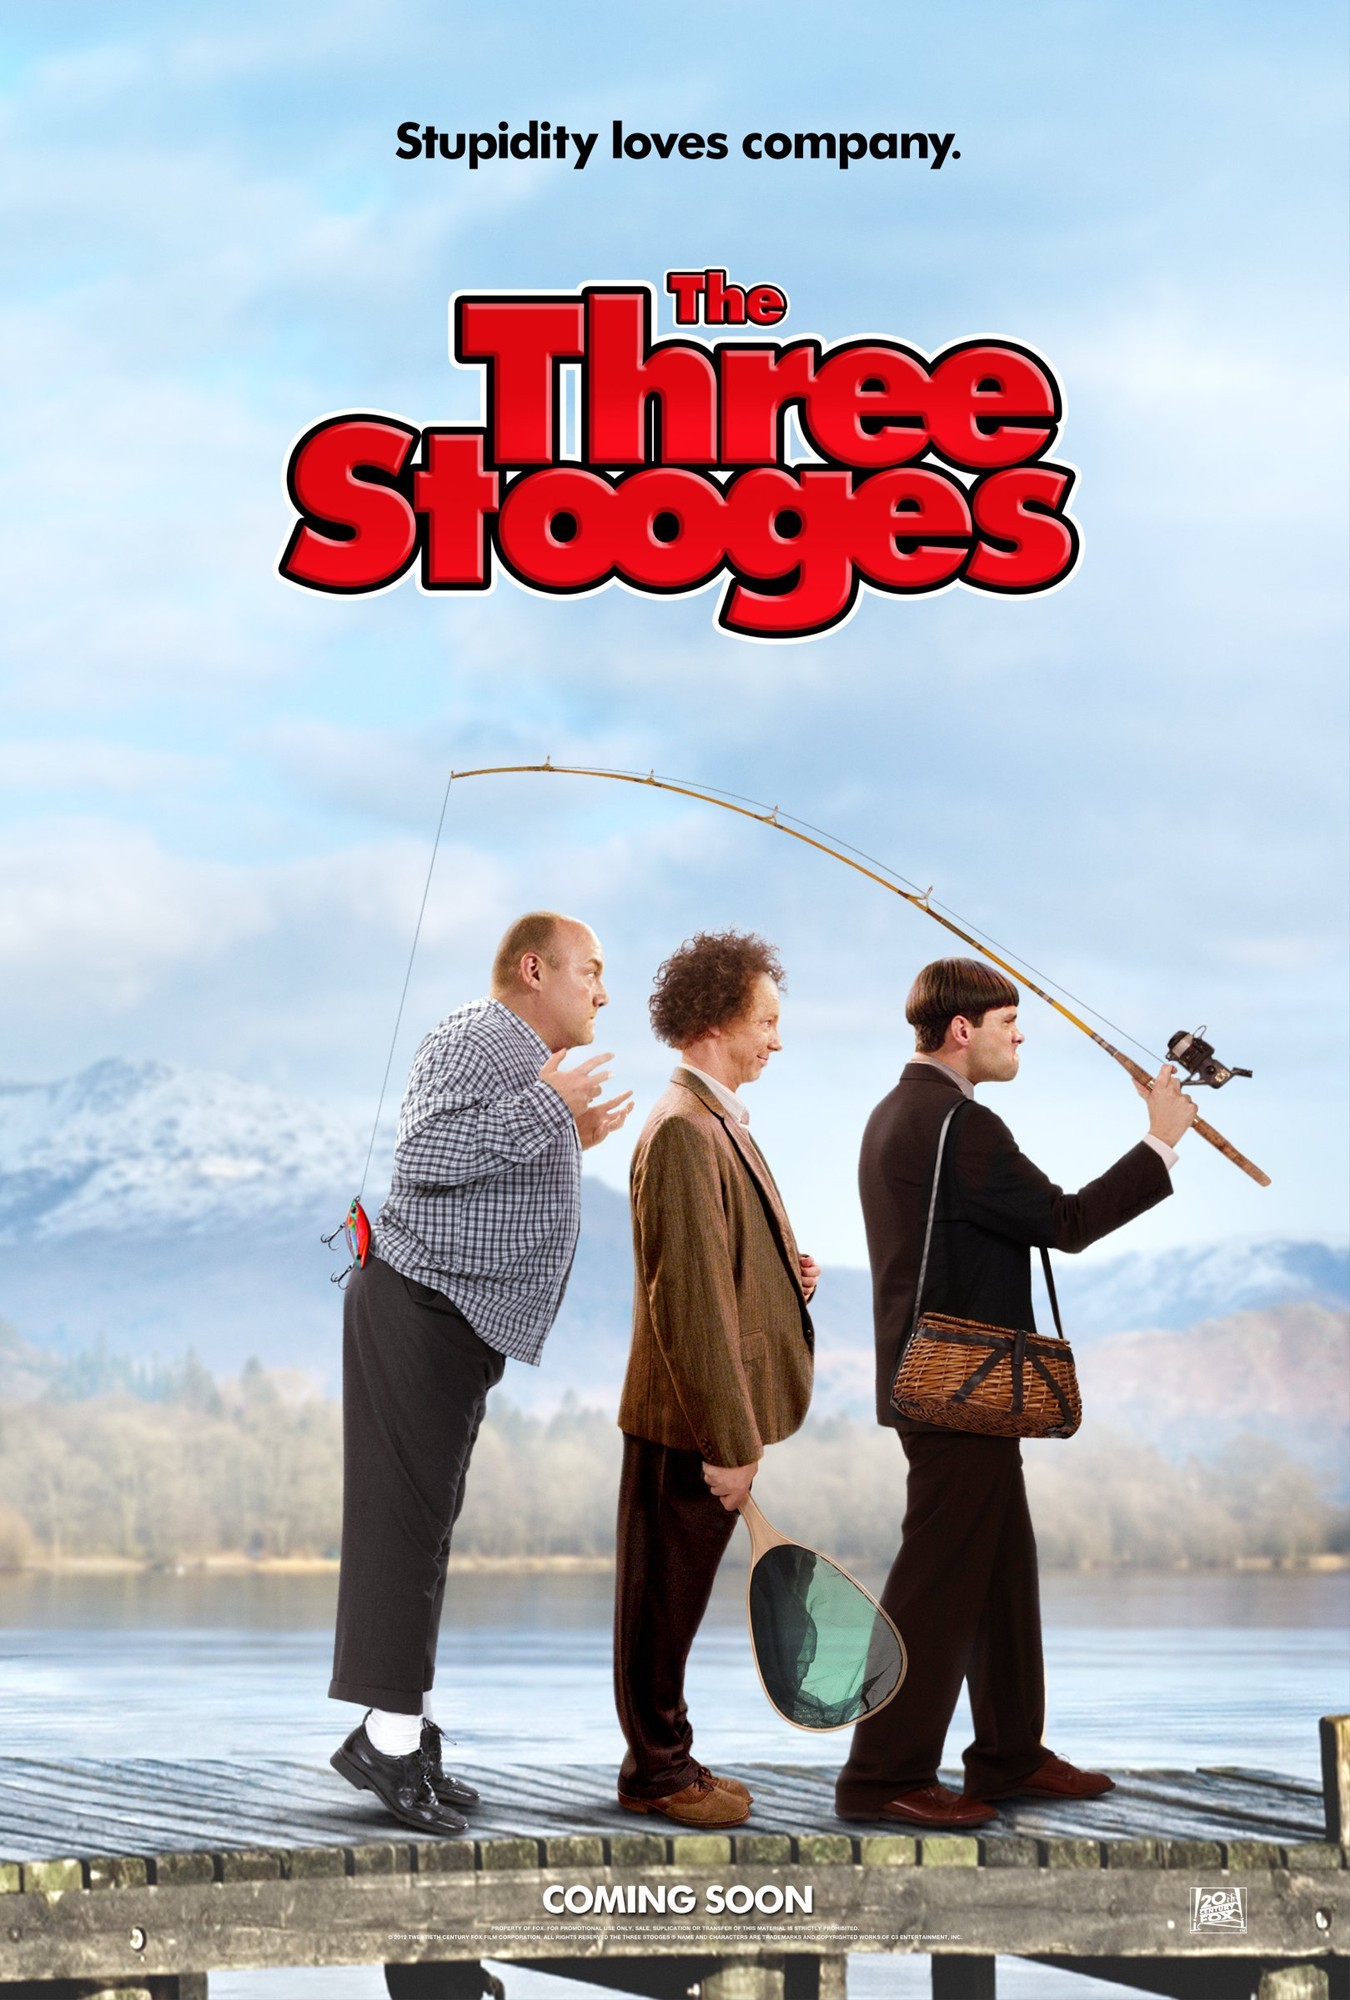 the-three-stooges-poster05.jpg